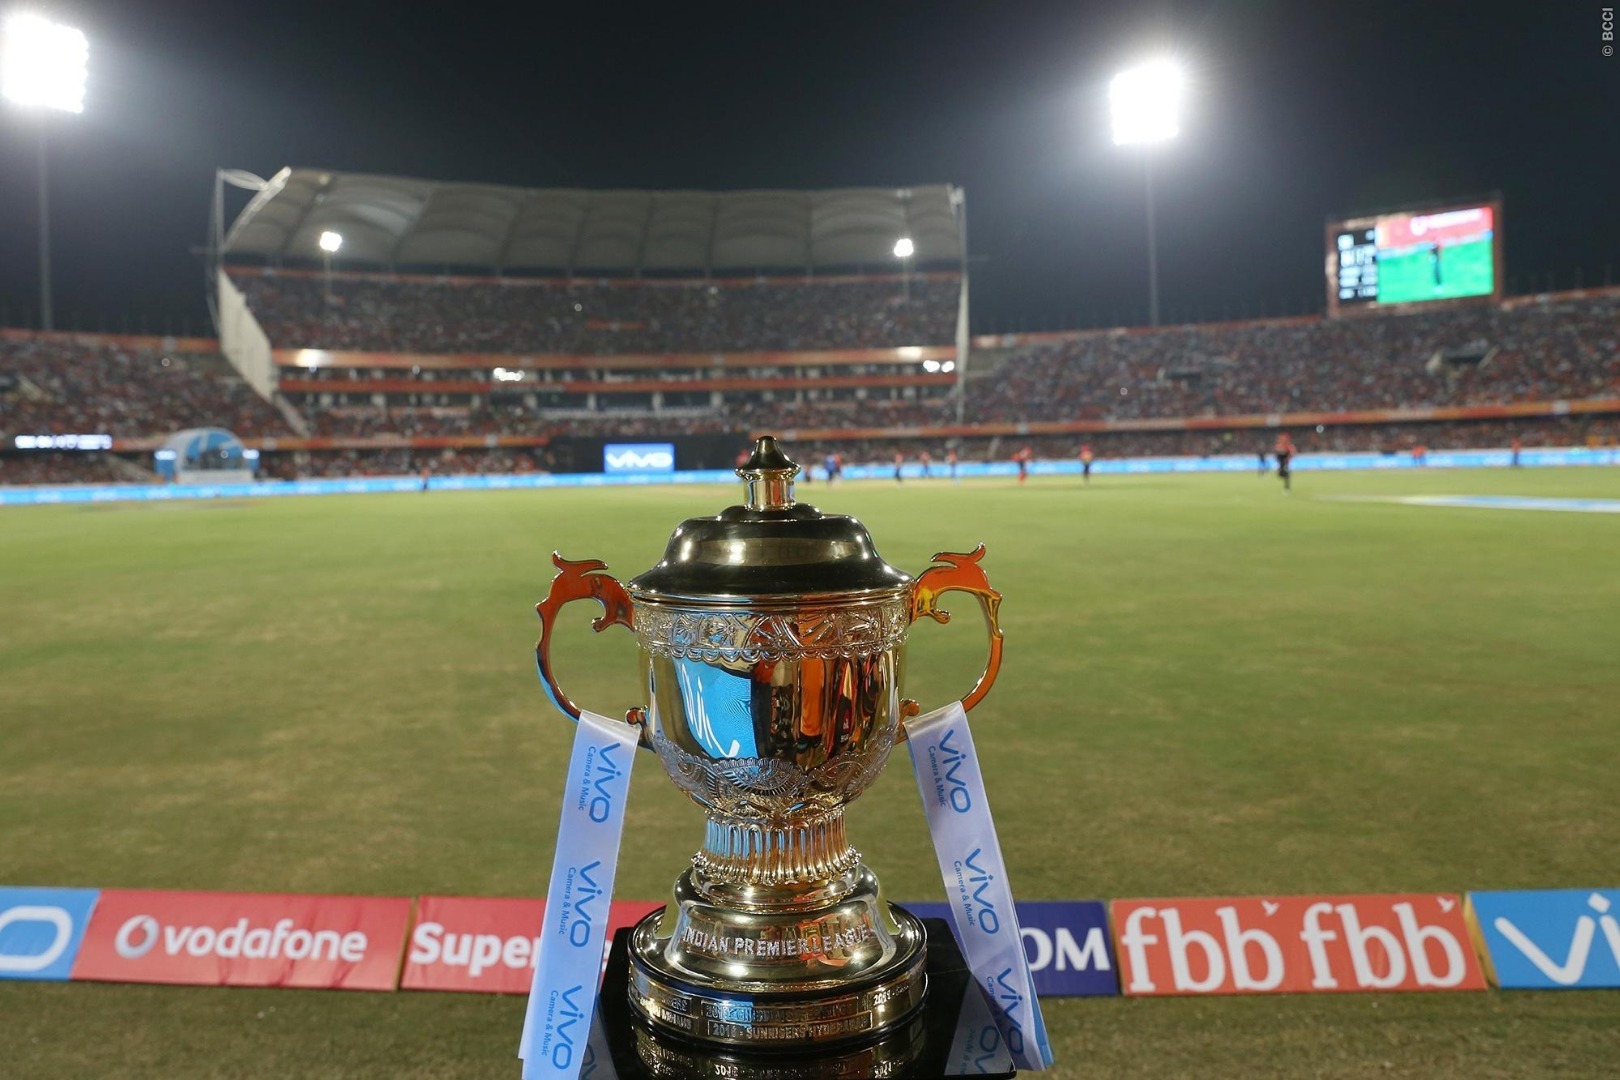 Star wins audio-visual production rights for IPL, BCCI domestic season Star wins audio-visual production rights for IPL, BCCI domestic season